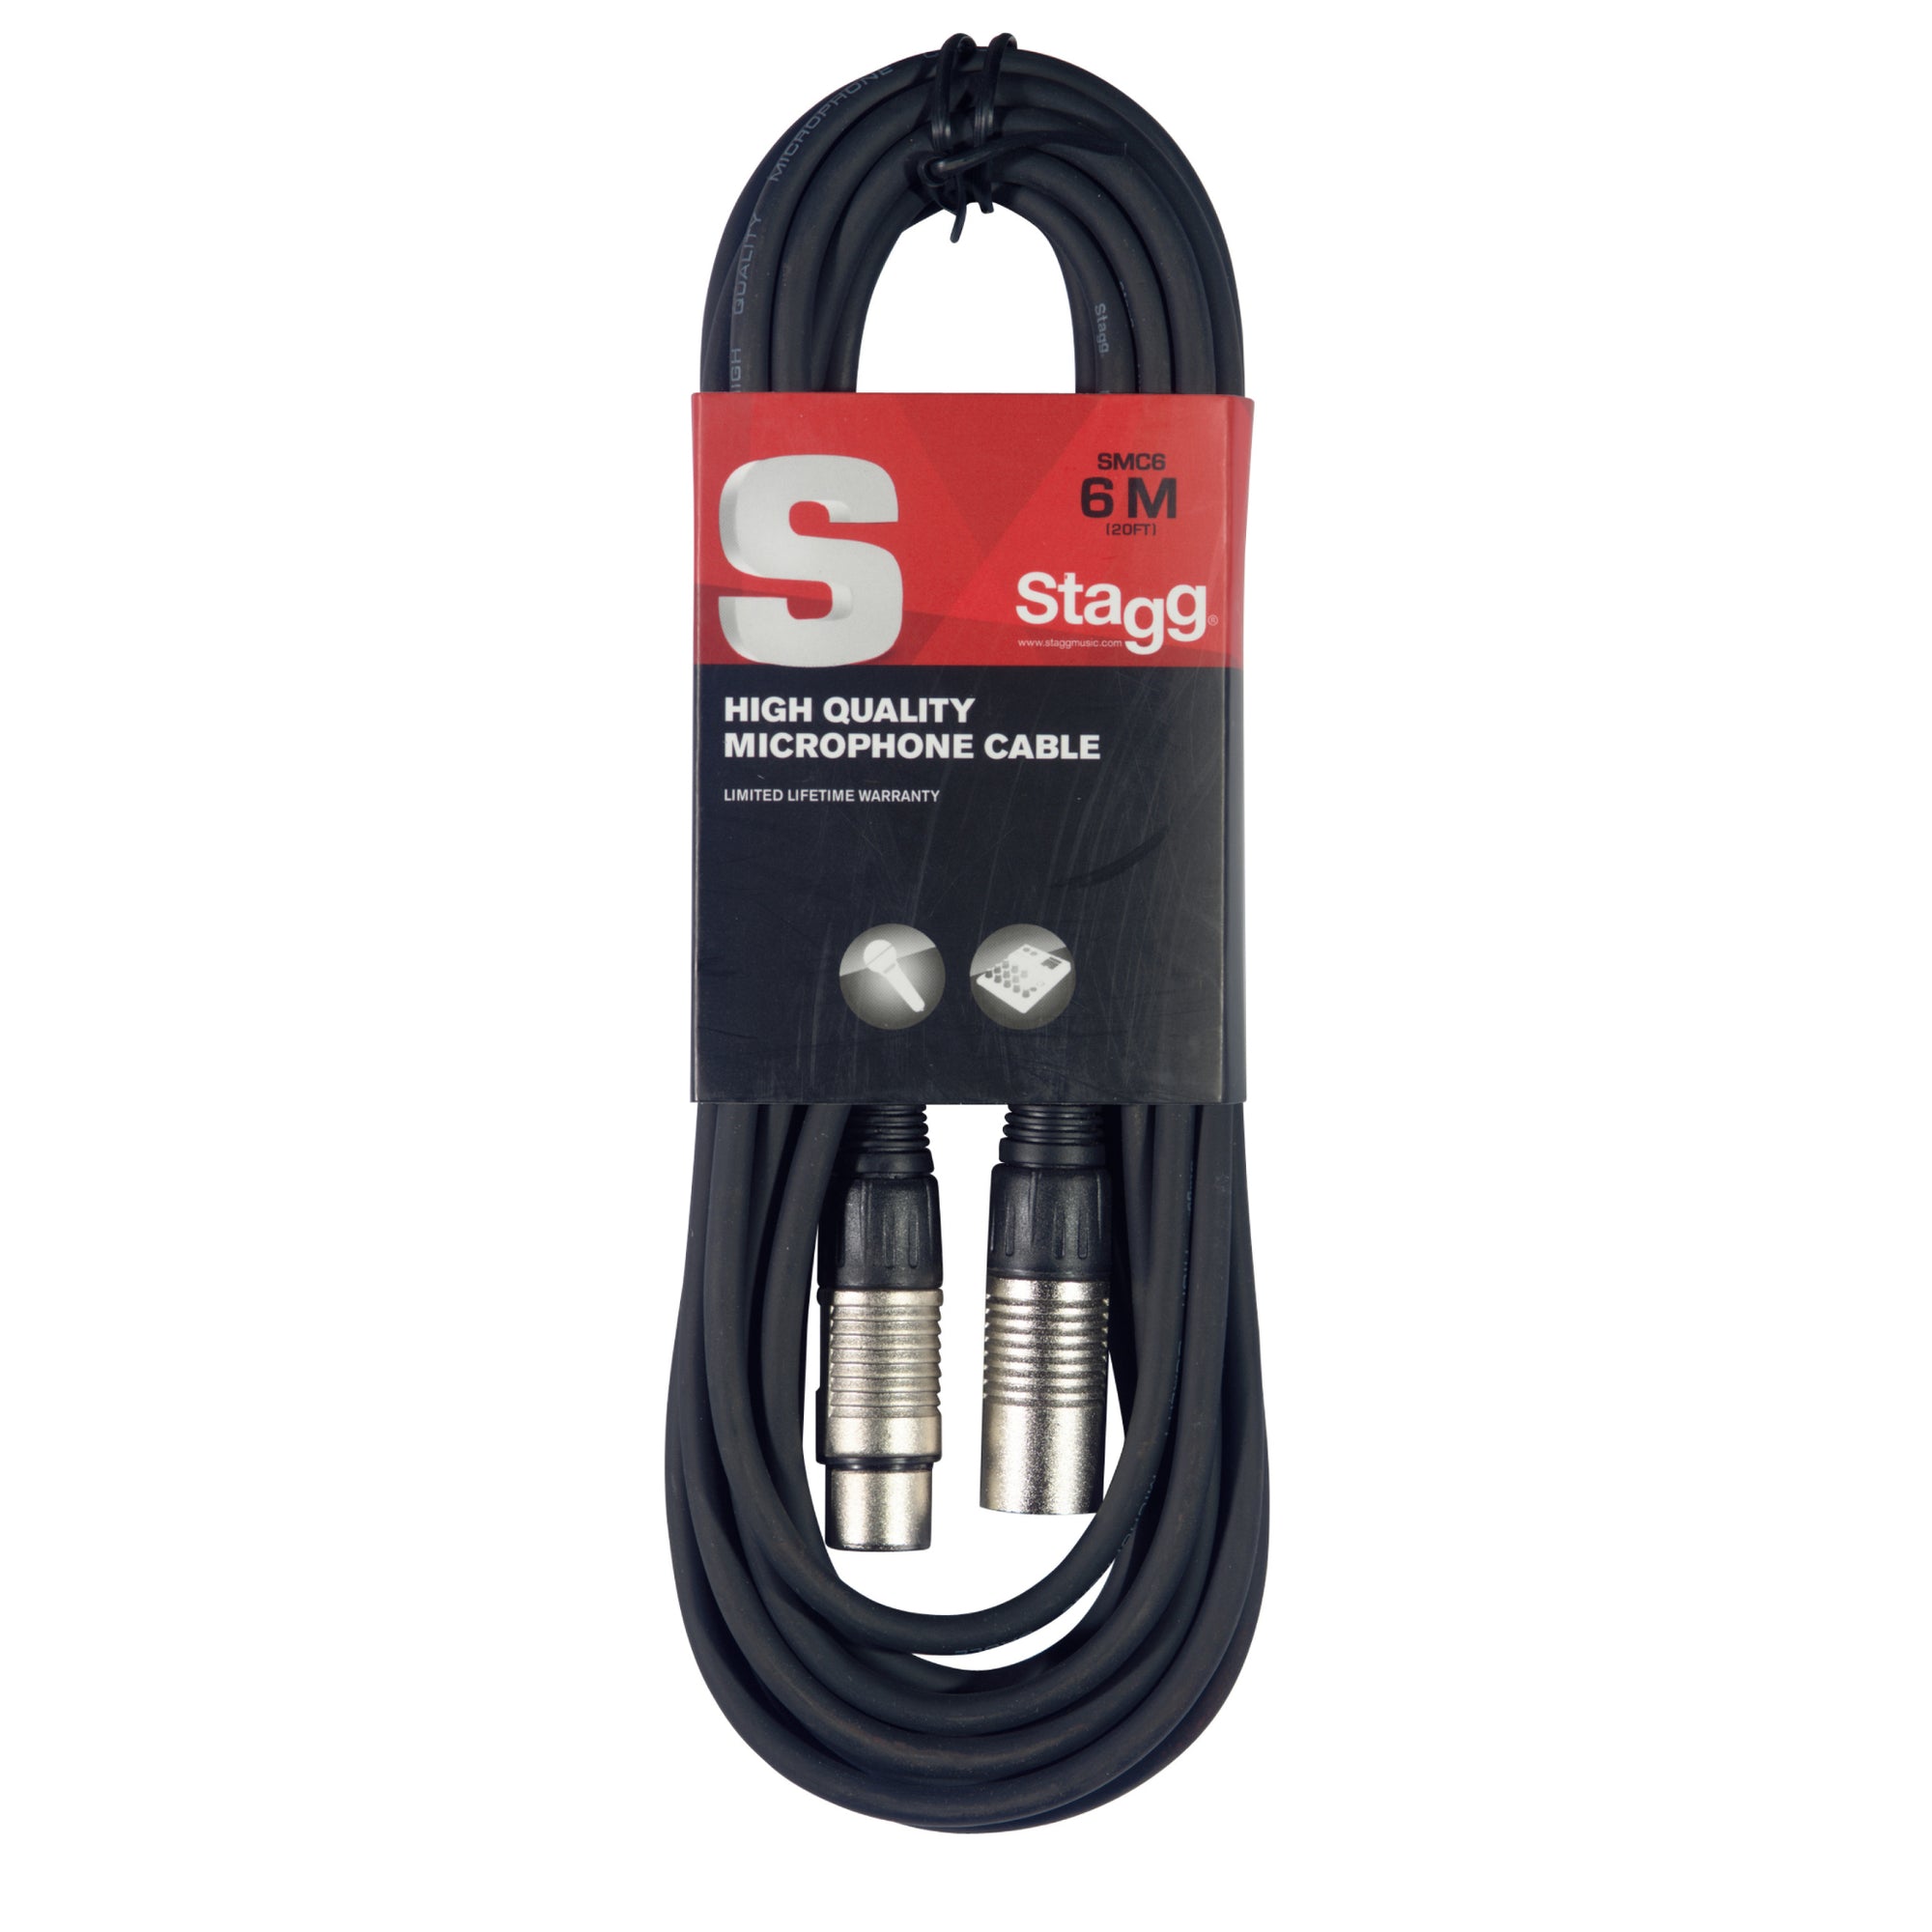 Stagg SMC6 20ft XLR Microphone Cable SMC6